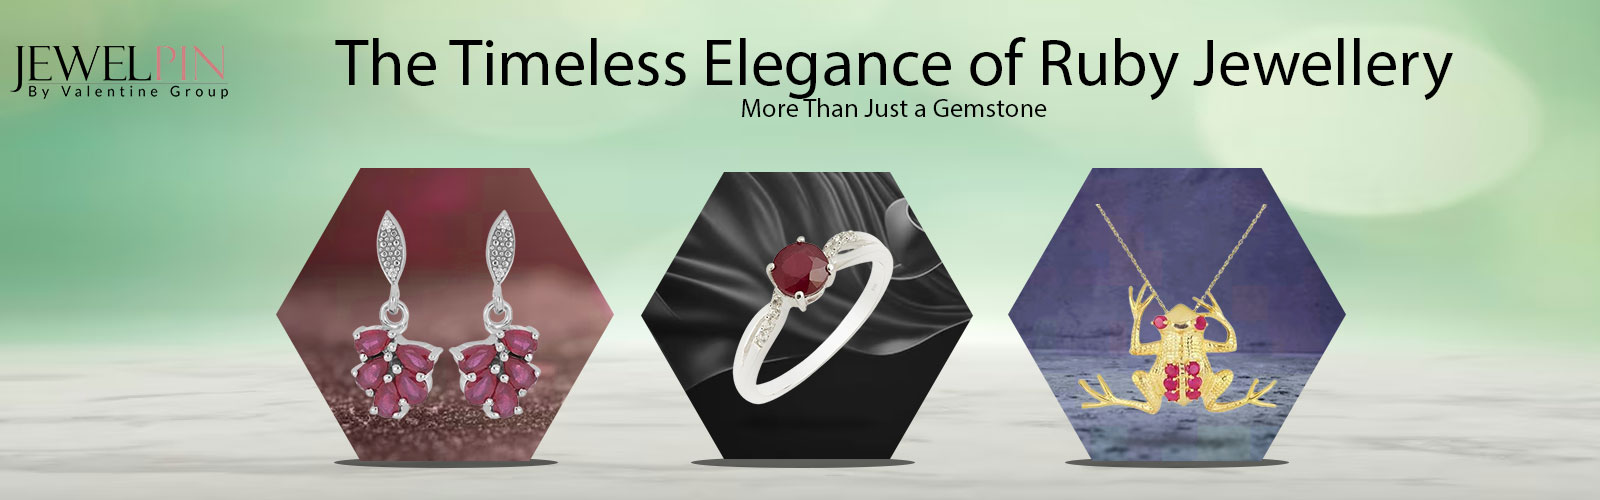 The Timeless Elegance of Ruby Jewellery More Than Just a Gemstone